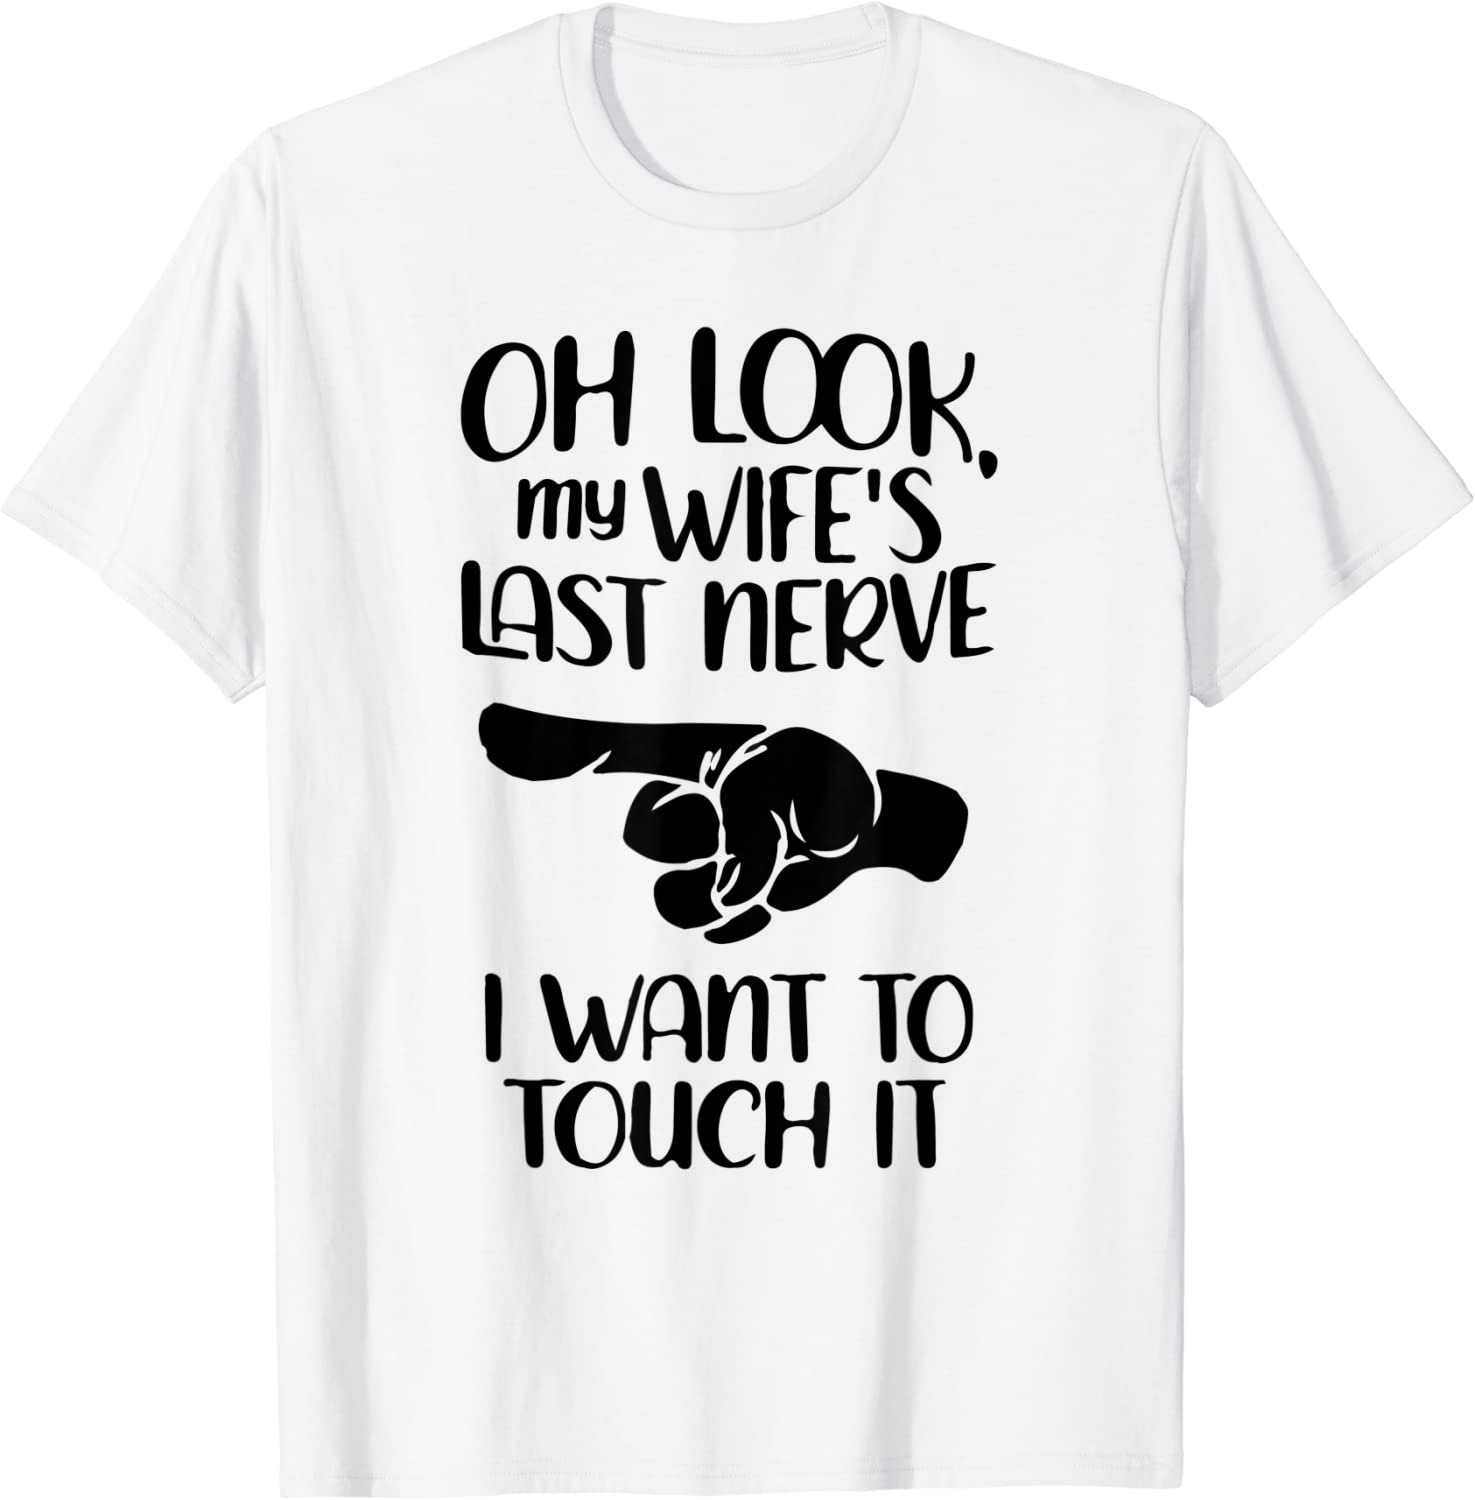 Oh look my wife's last nerve i want to touch it Tee Shirt ...